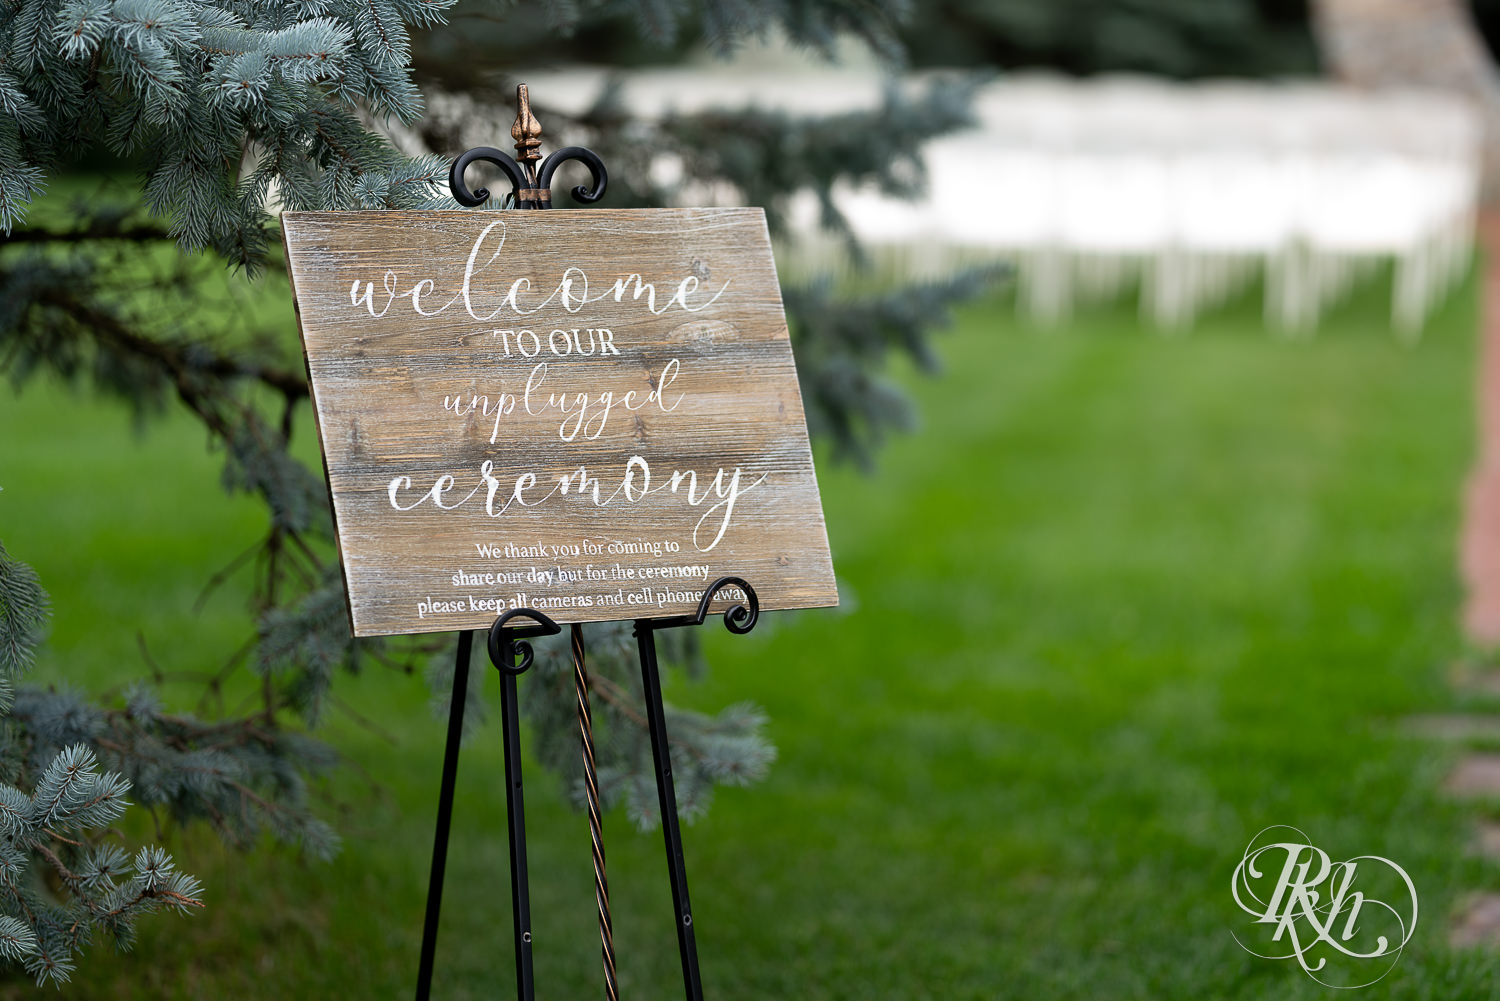 Rustic unplugged ceremony sign at Glenhaven Events in Farmington, Minnesota.